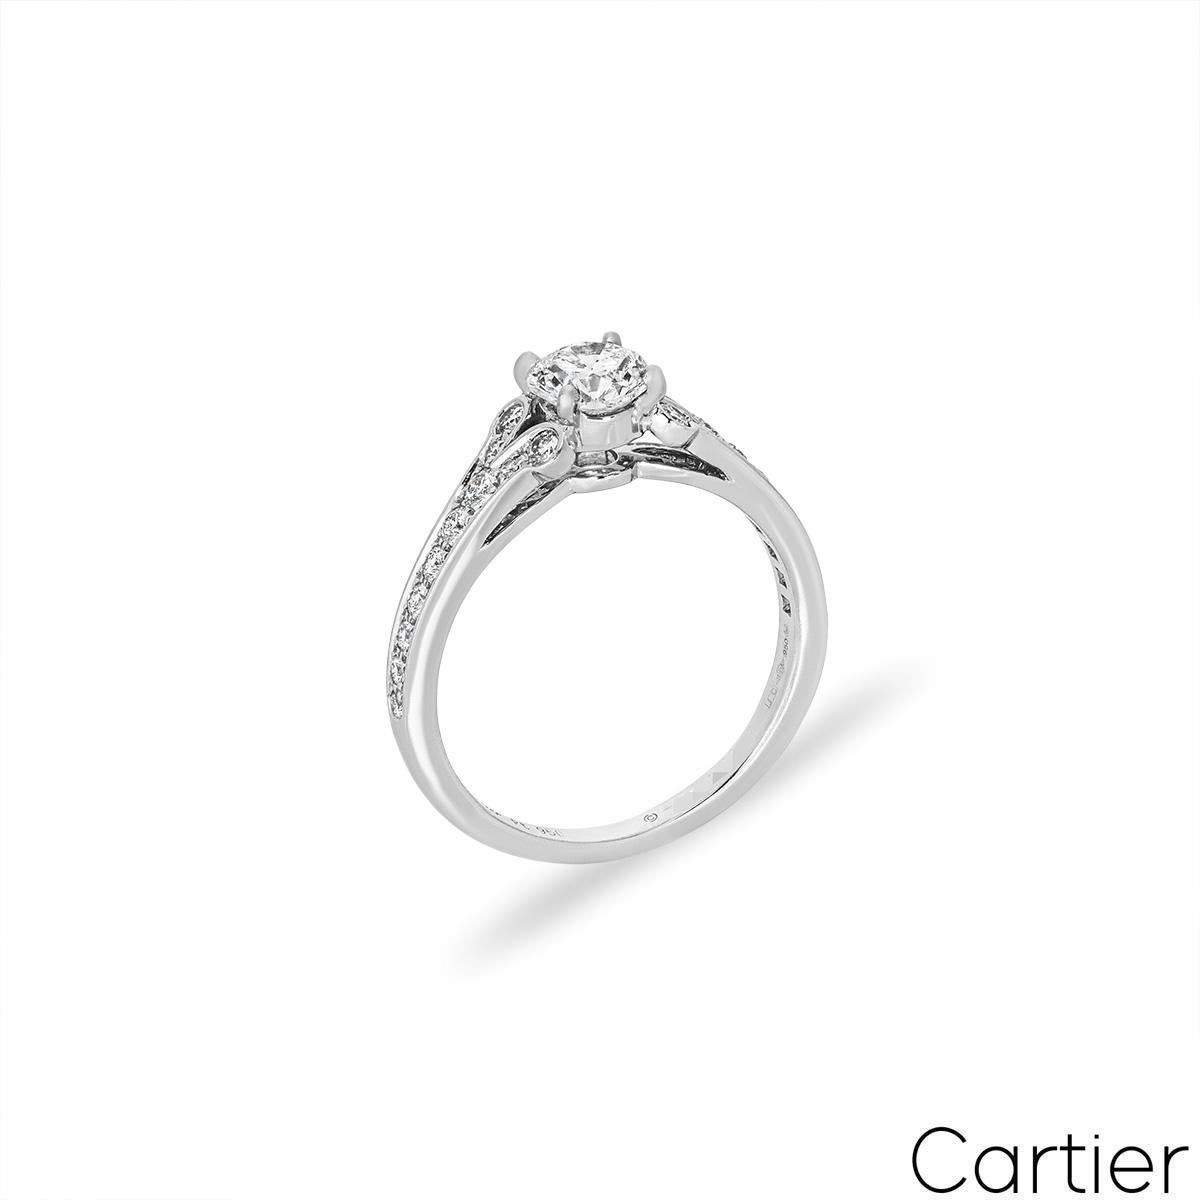 A graceful platinum diamond ring by Cartier from the Ballerine Solitaire collection. The engagement ring features a round brilliant cut diamond set to the centre in a four prong mount weighing 0.71ct, G colour and VVS2 clarity. The ring tapers down